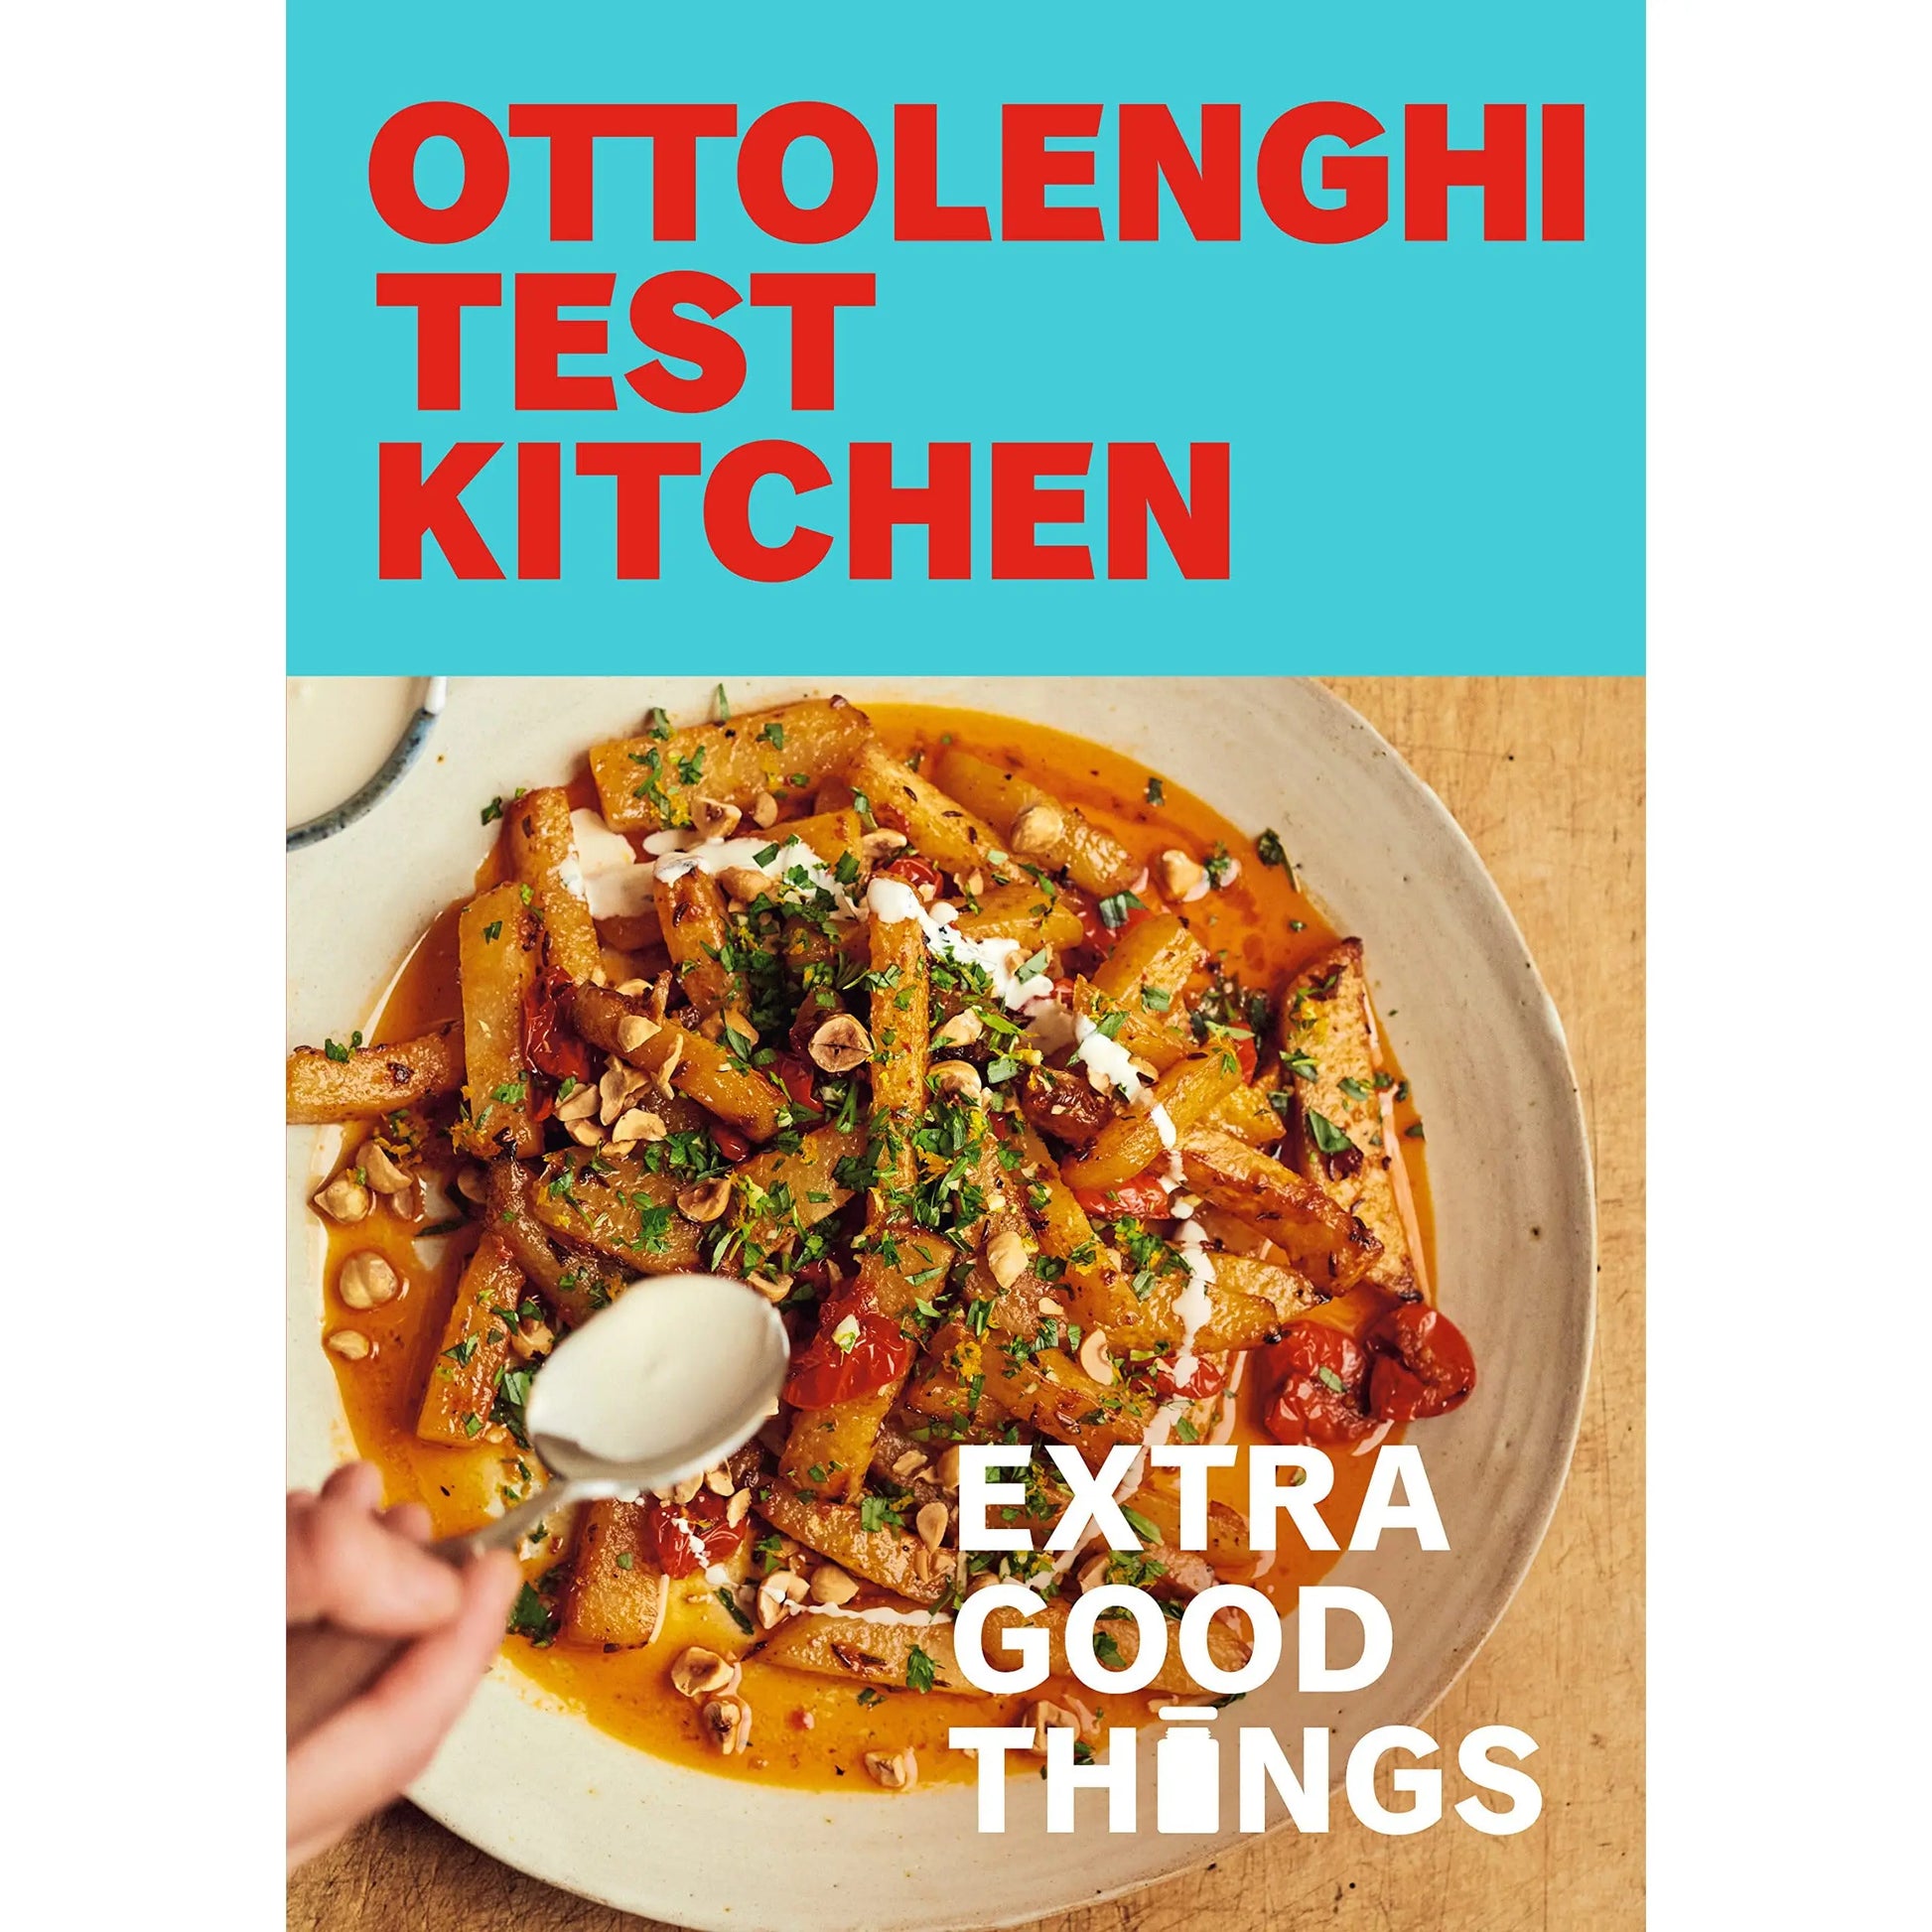 Ottolenghi Test Kitchen: Extra Good Things PENGUIN HOUSE